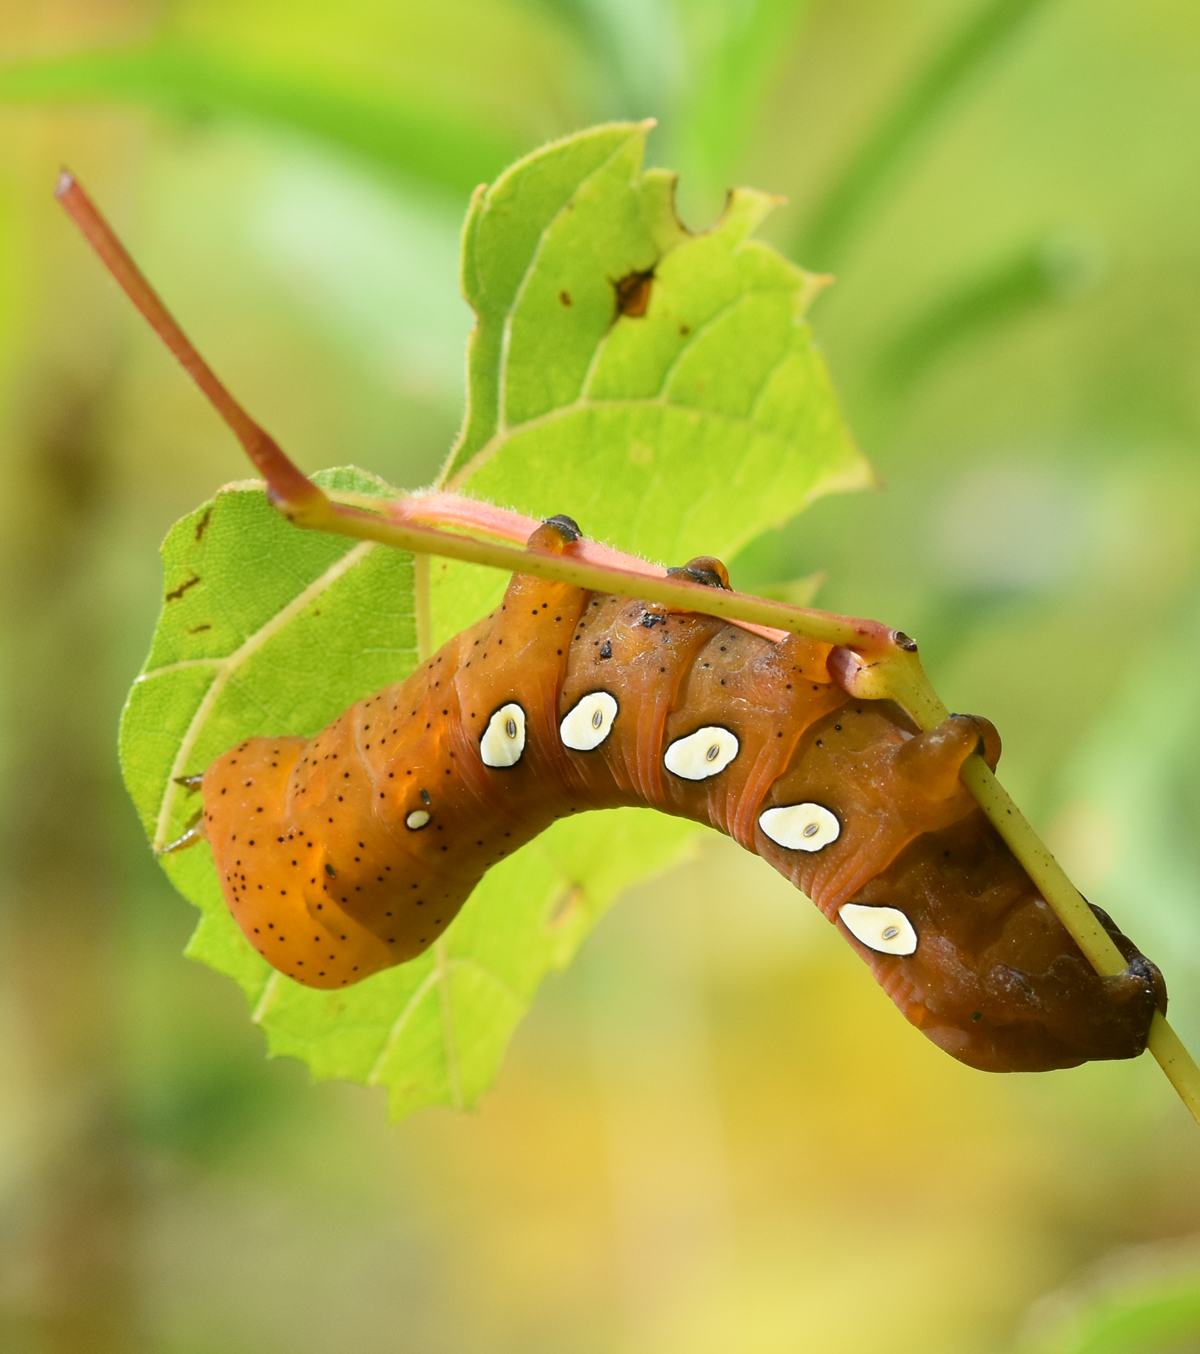 What Big Smooth Caterpillar Is Rusty Brown With 5 White Eye Spots Or Green With Small Black Spots Divided With Vertical White Lines Natural Crooks Ramblings